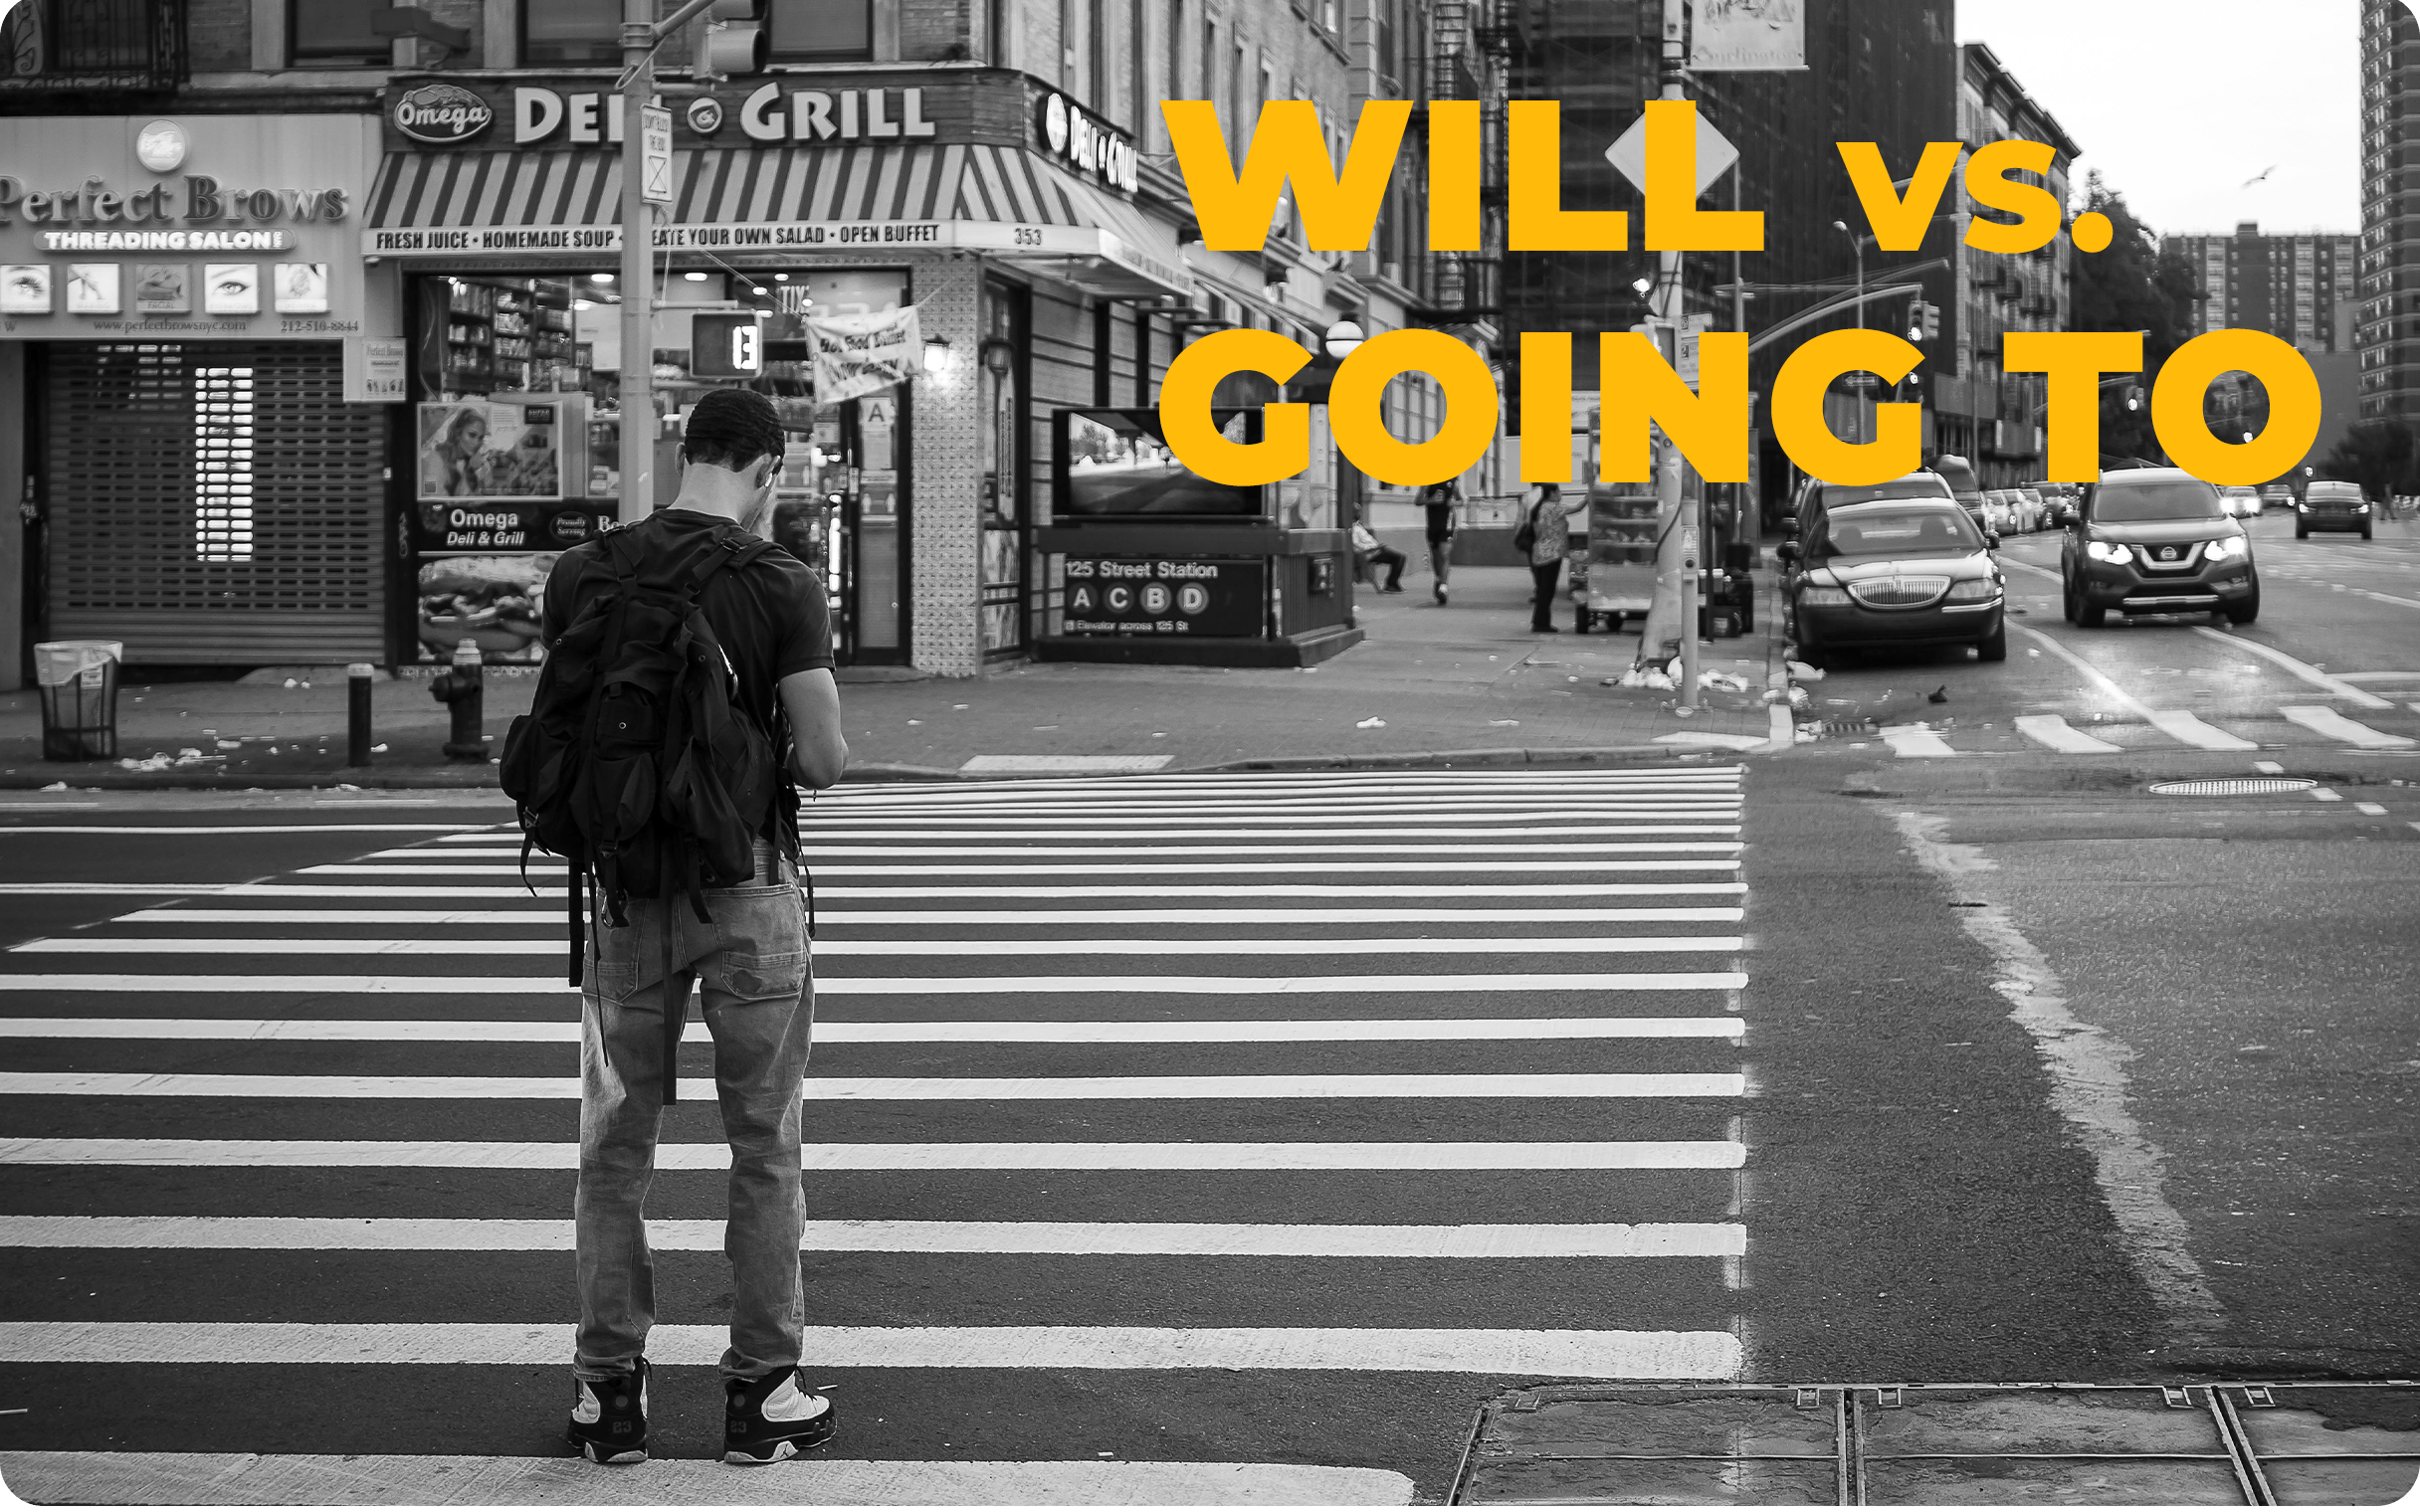 "Will" vs. "Going to"